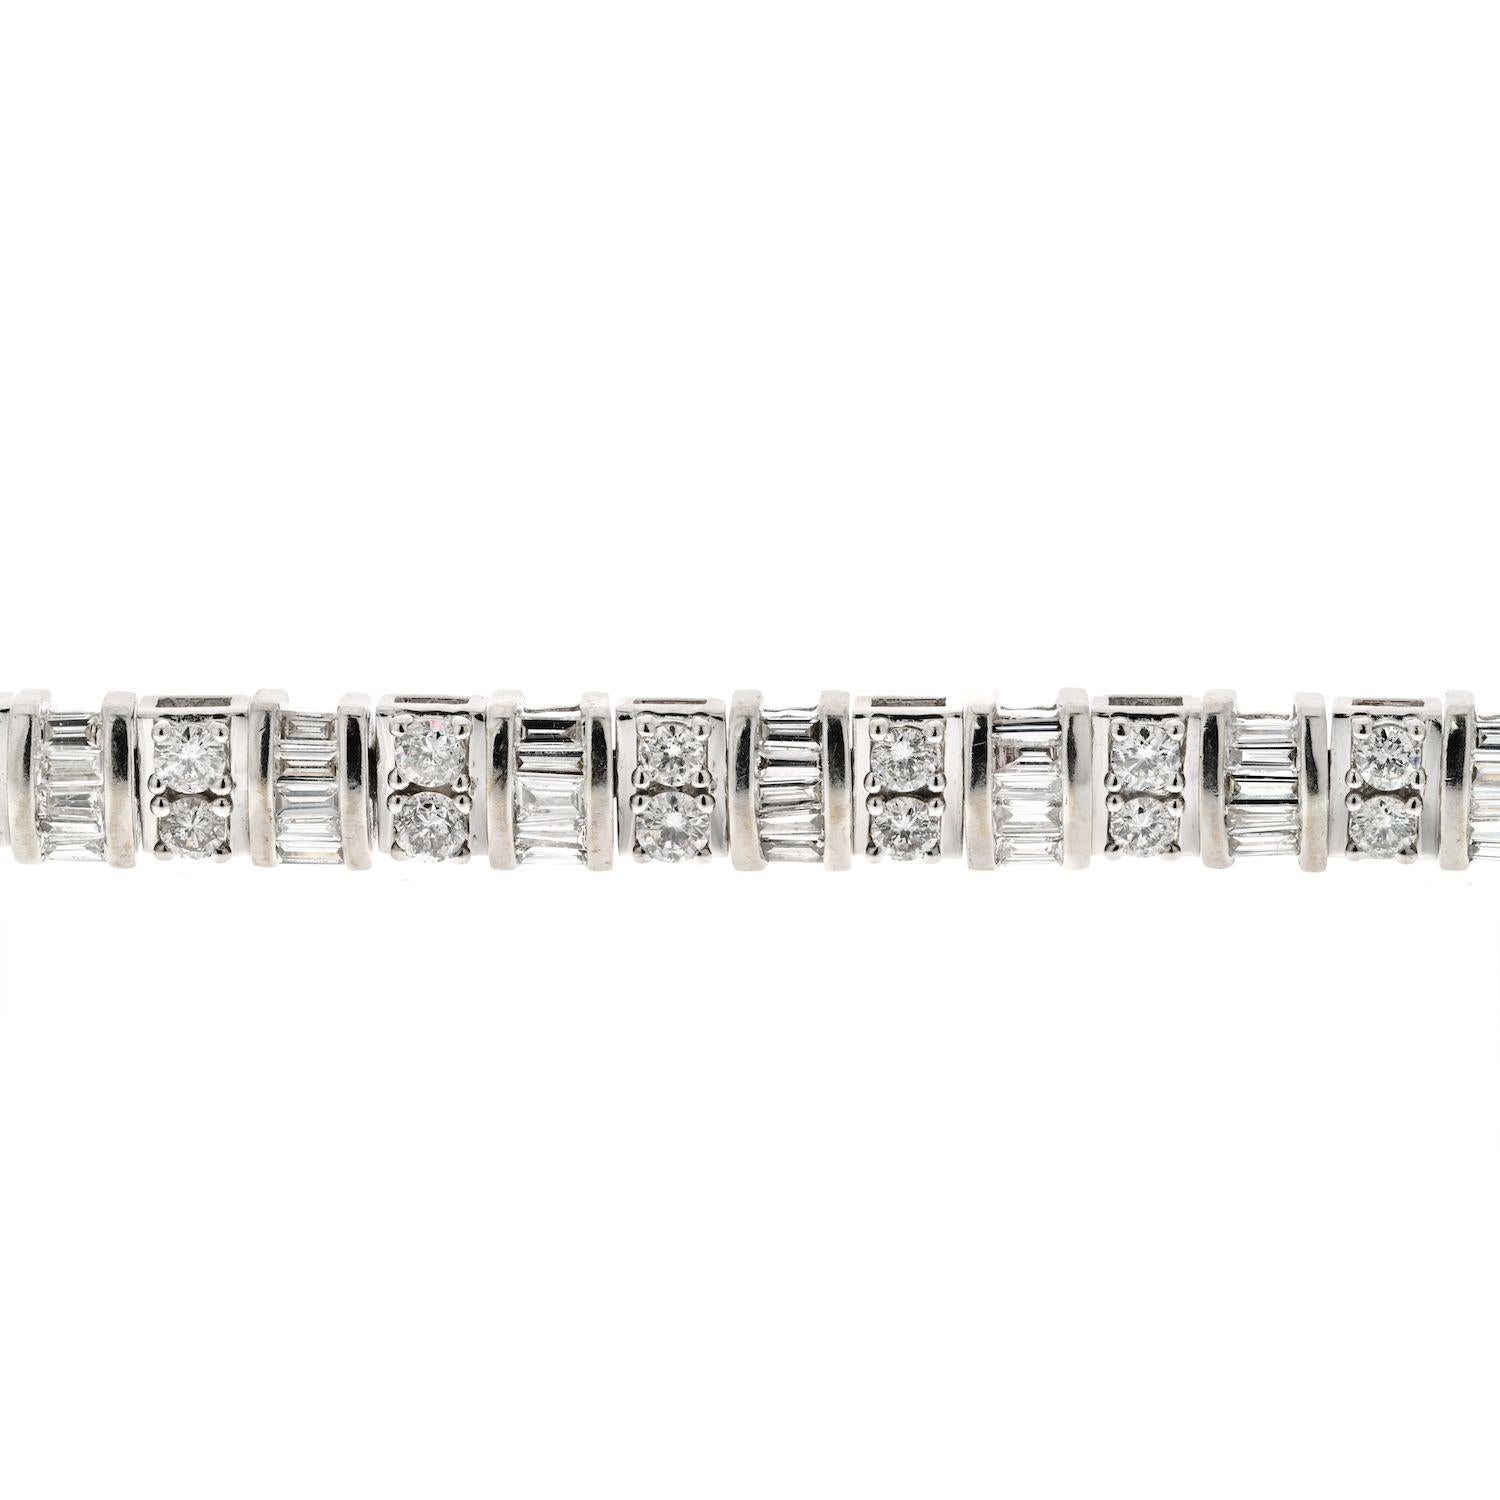 Estate 14K White Gold 8.00cttw Round And Bagette Diamond One Line Bracelet.
Diamond Weight: 8.00cttw.
Quality: H-I color, VS-SI clarity.
Length: 7.5 inches
Width: 6.3mm
Lock: Box clasp with safety.
